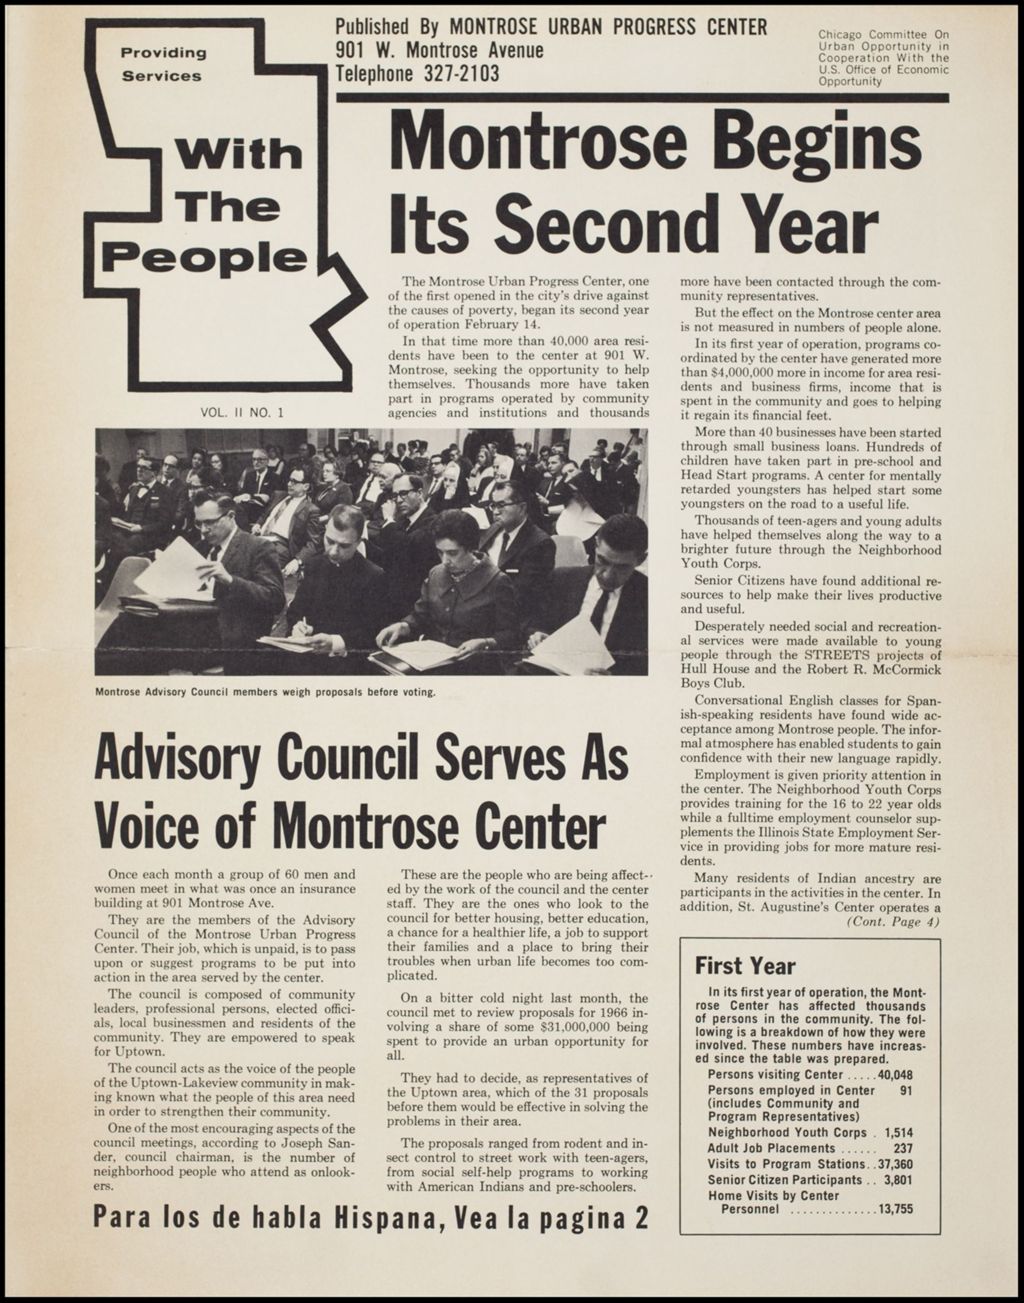 Miniature of Newsletter "With the People", 1966 (Folder IV-761a)